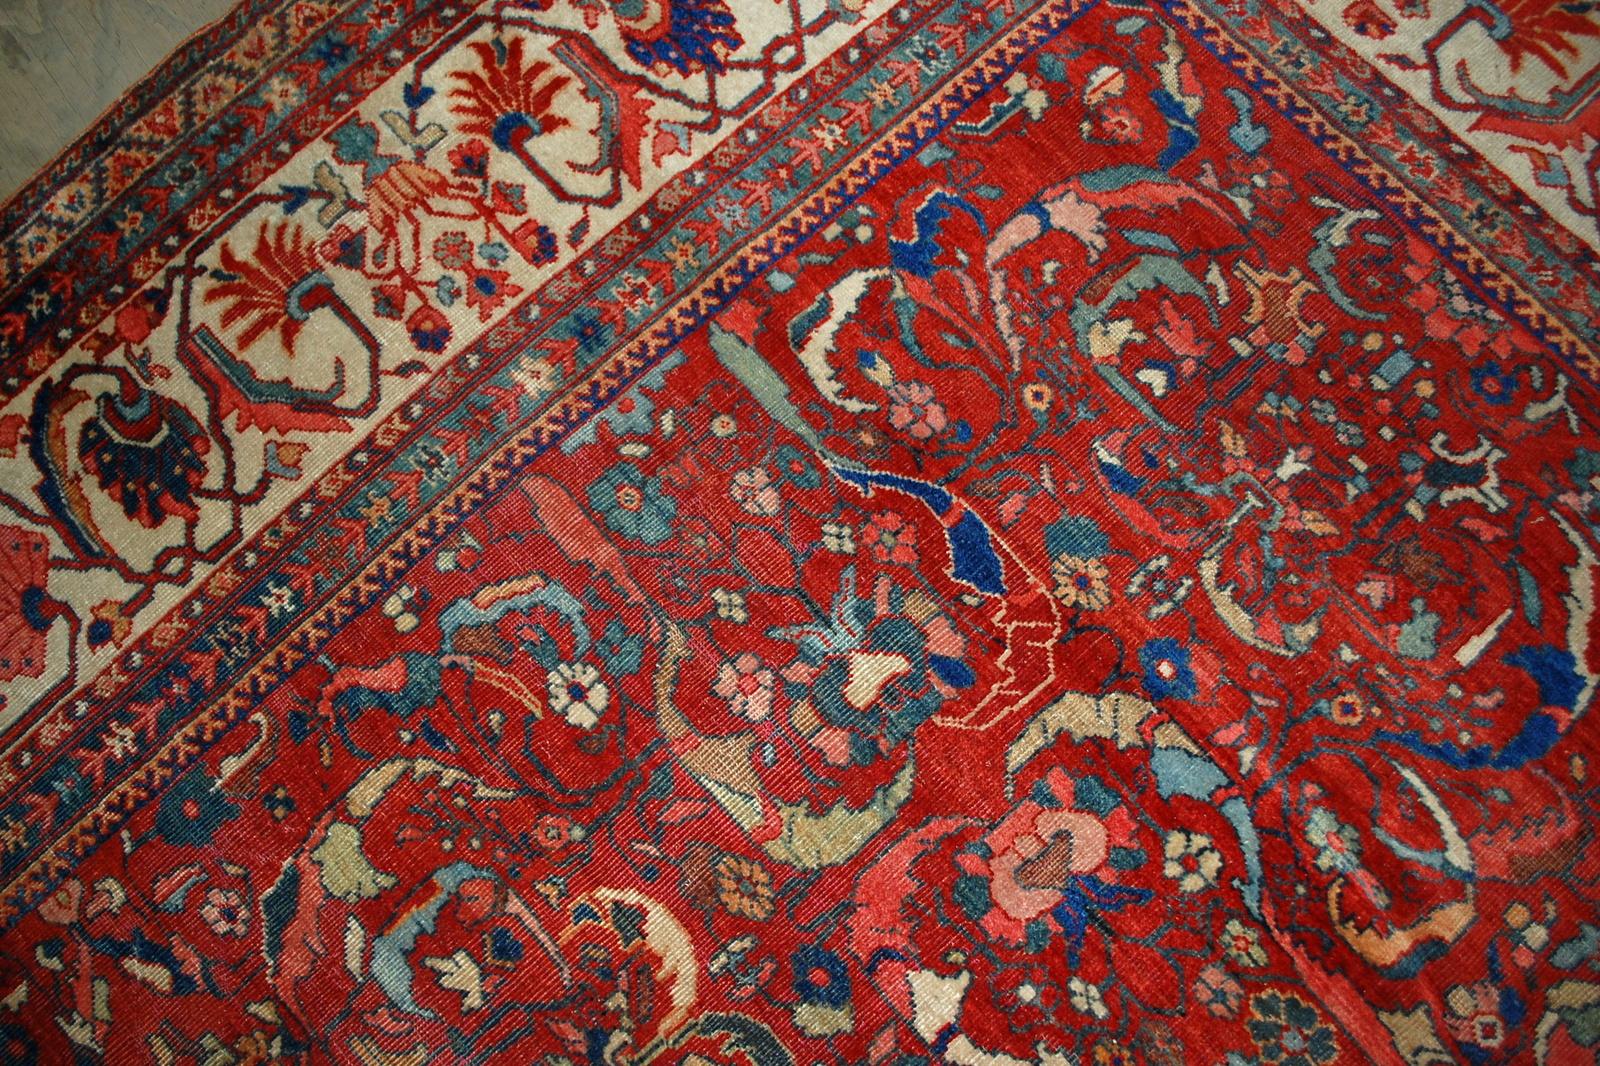 Handmade antique Sultanabad rug in good condition, it is from the end of 19th century. This rug made in red and beige wool. Measures: 9.10' x 13' (303cm x 396cm).